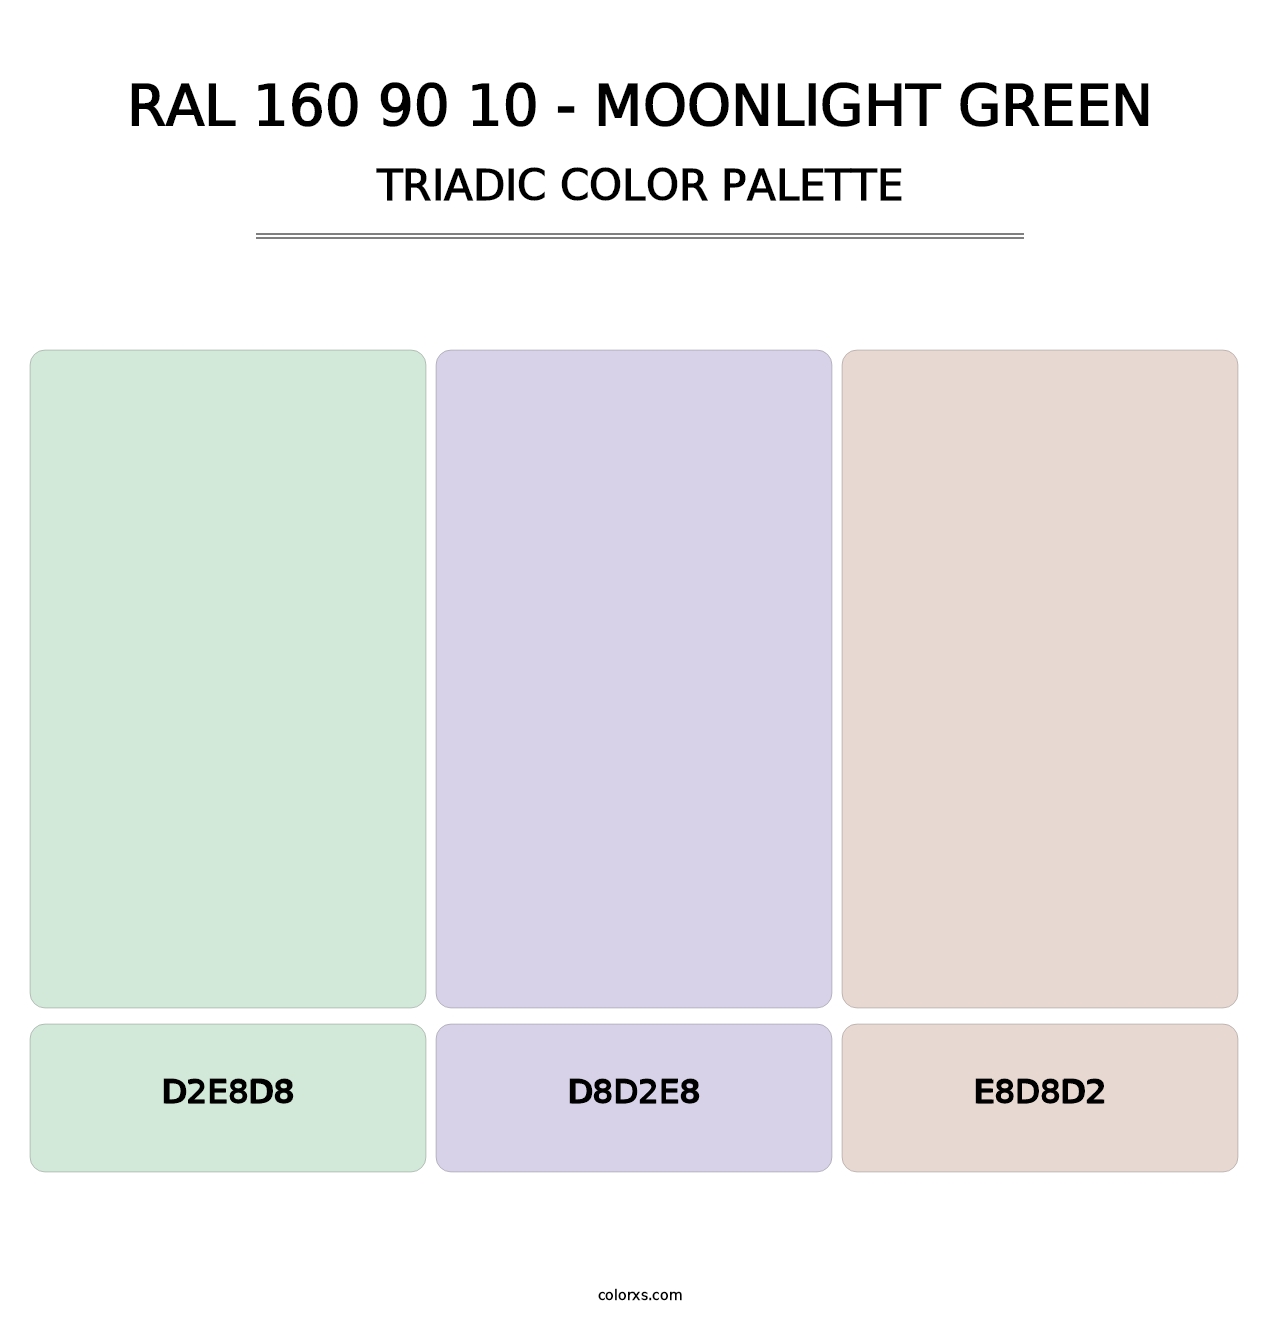 RAL 160 90 10 - Moonlight Green - Triadic Color Palette